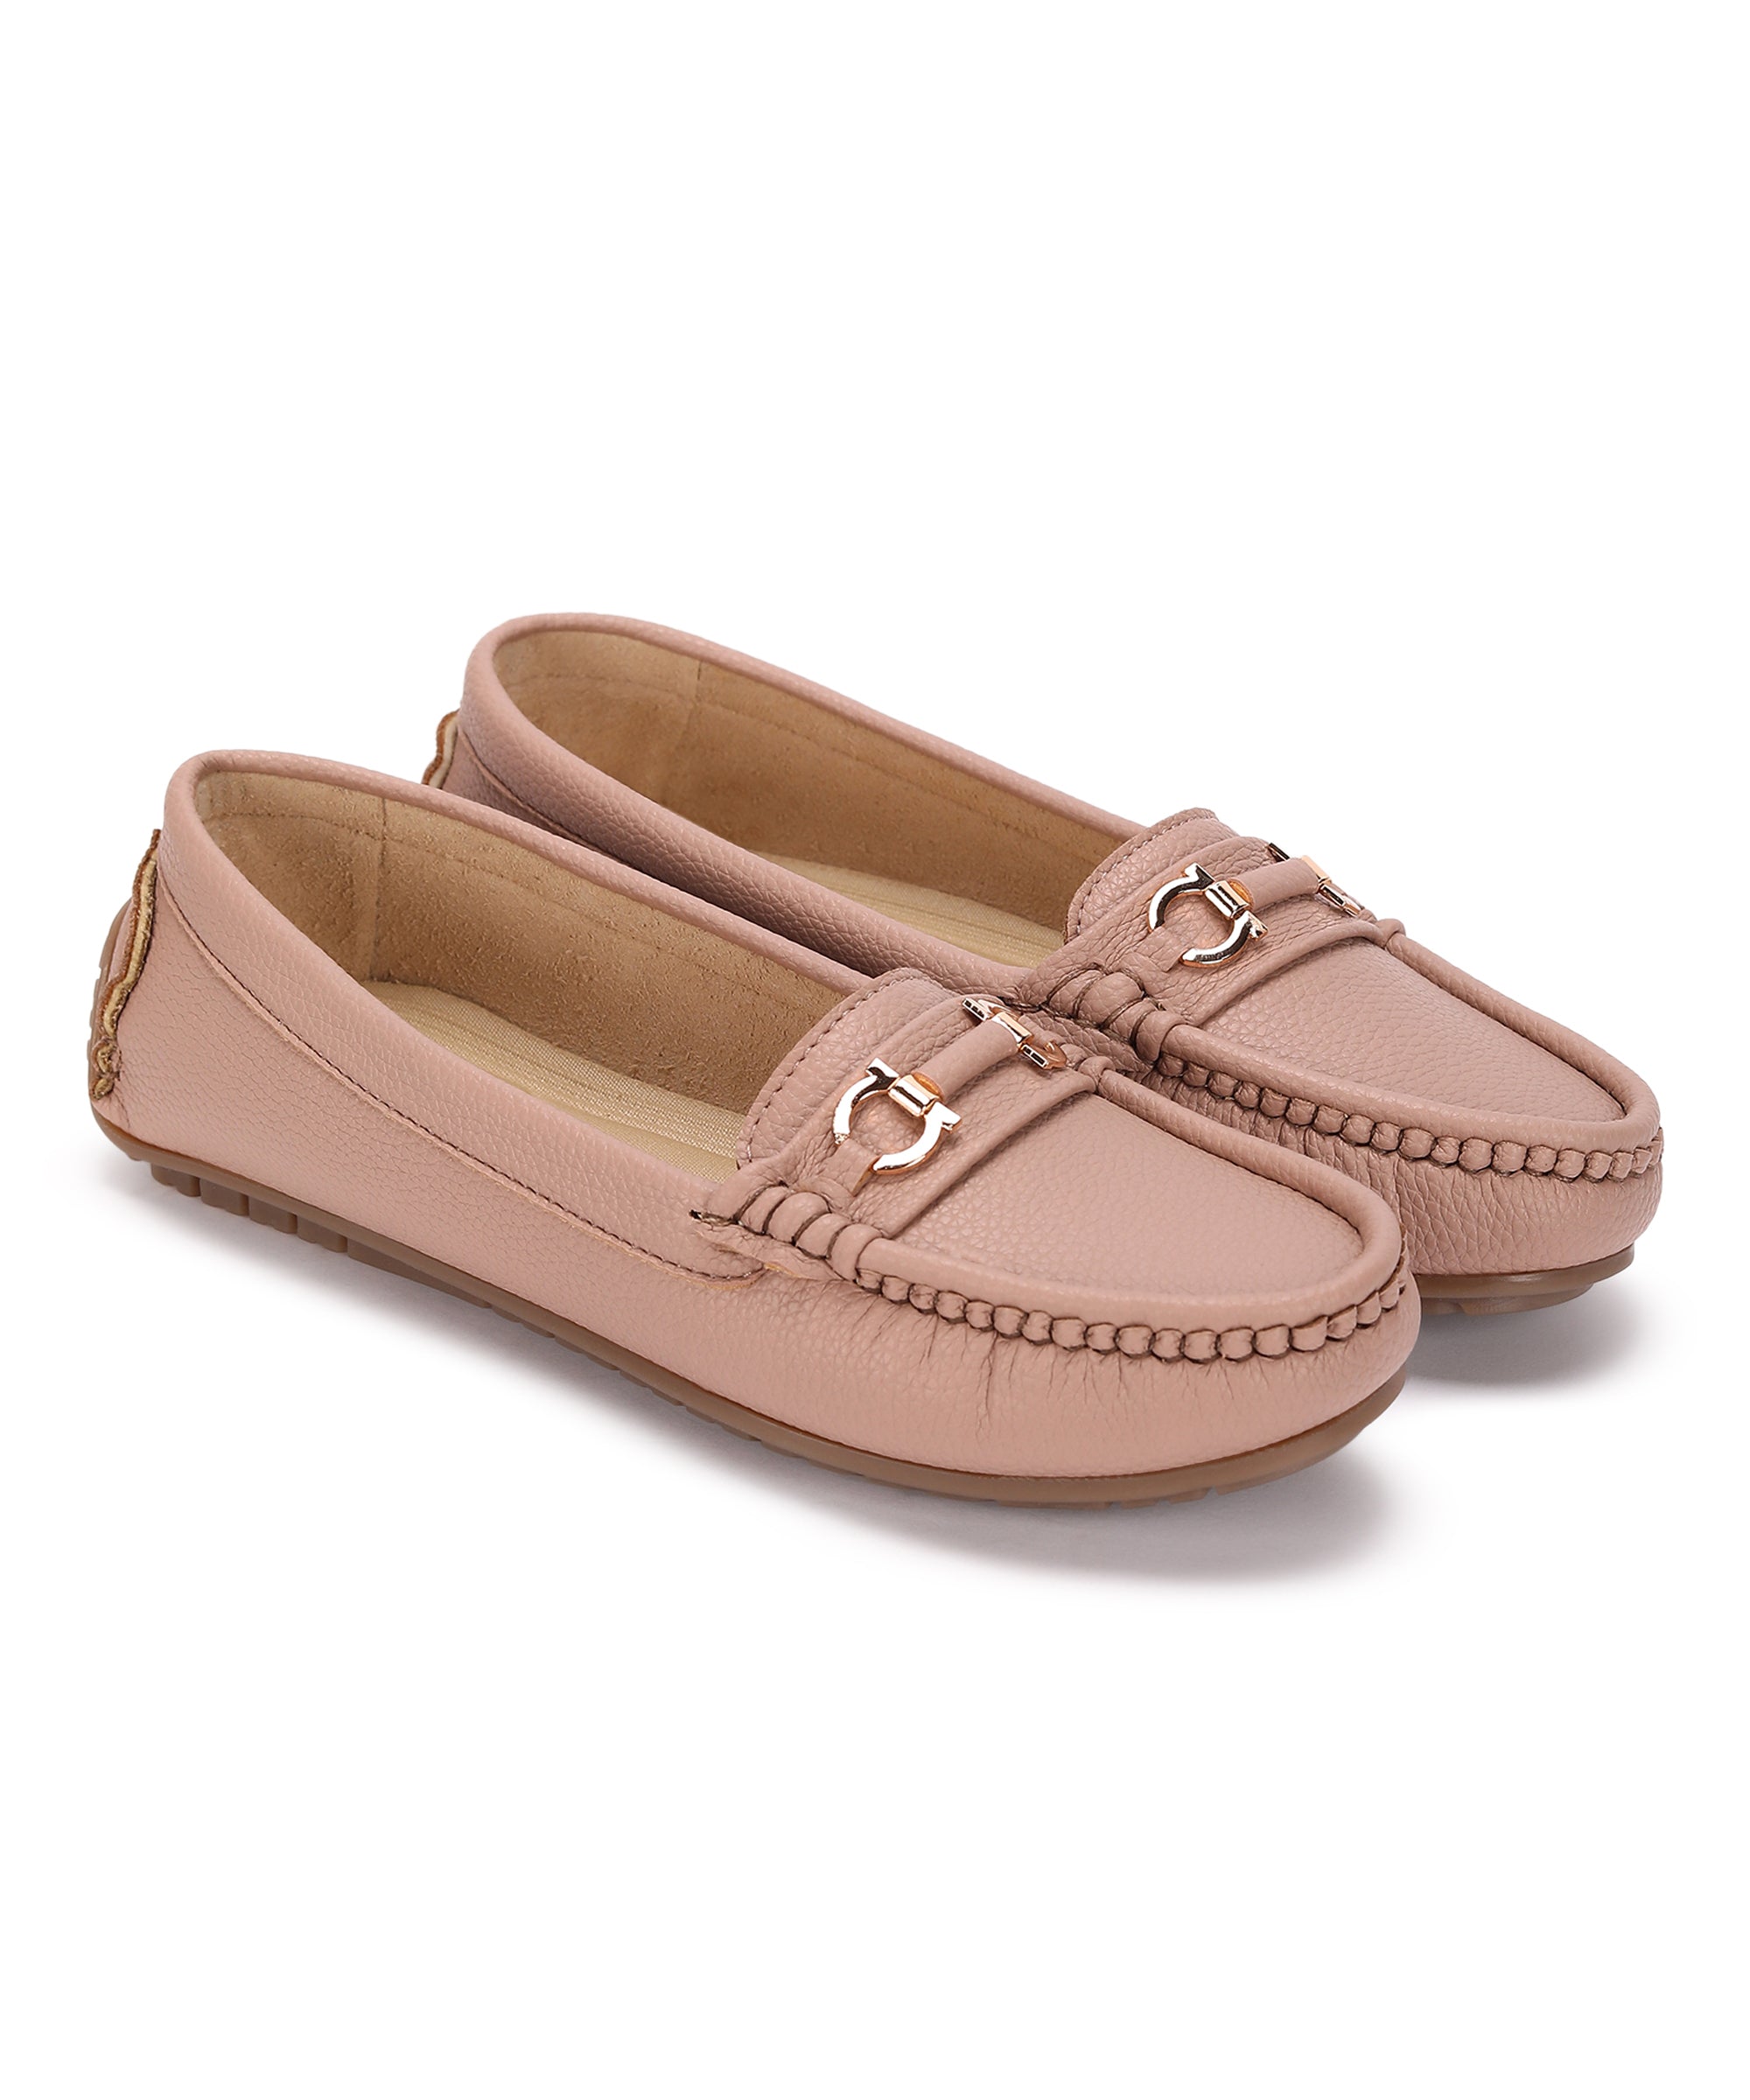 Paragon Women&#39;s Formal Loafer Shoes | Latest Design with Stylish Features, Comfortable Cushioned Sole and Sturdy Construction